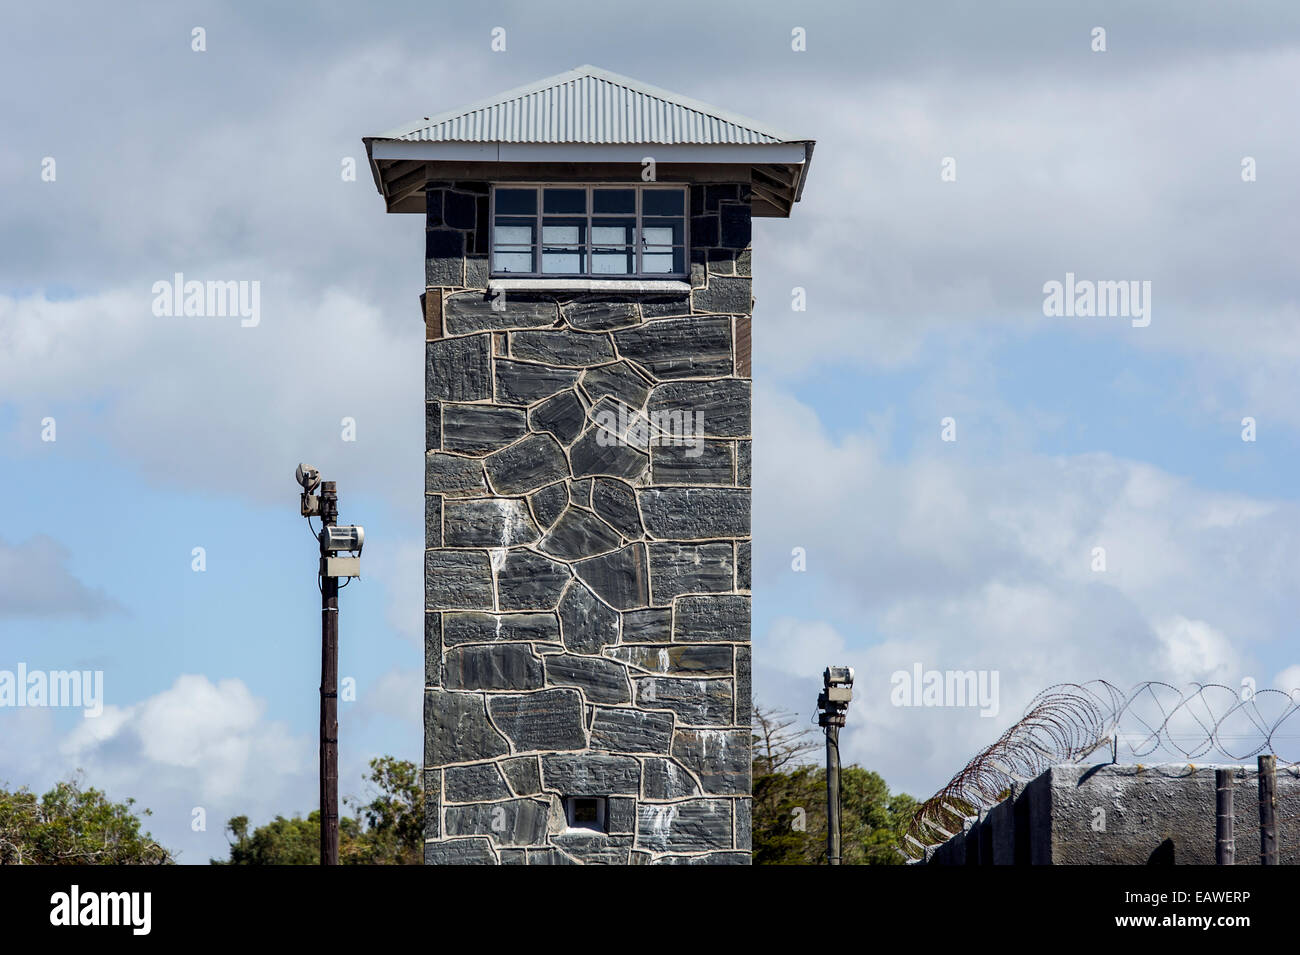 Windows of a guard post look out from a stone prison watch tower. Stock Photo